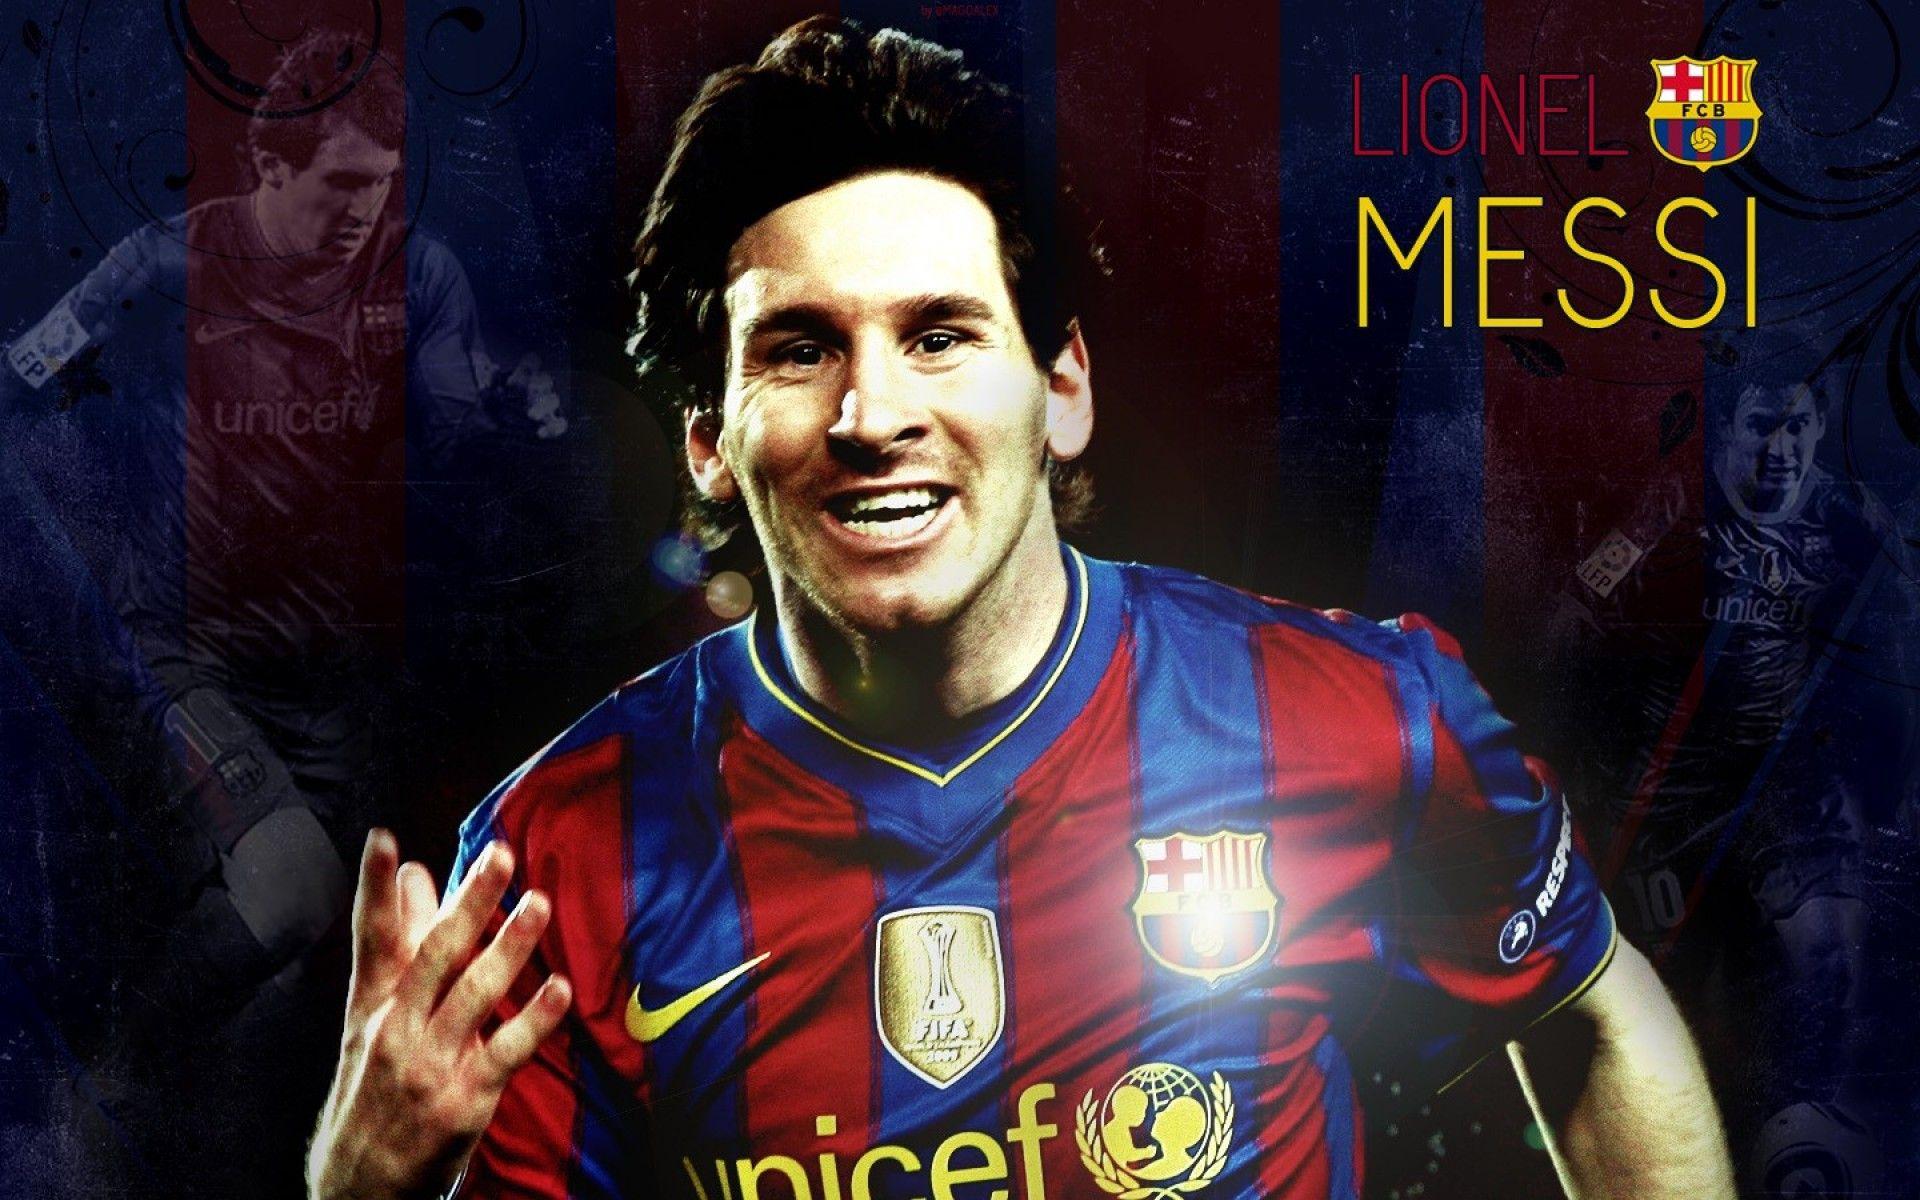 Lionel Messi Footballer Wallpaper, High Definition, High Quality